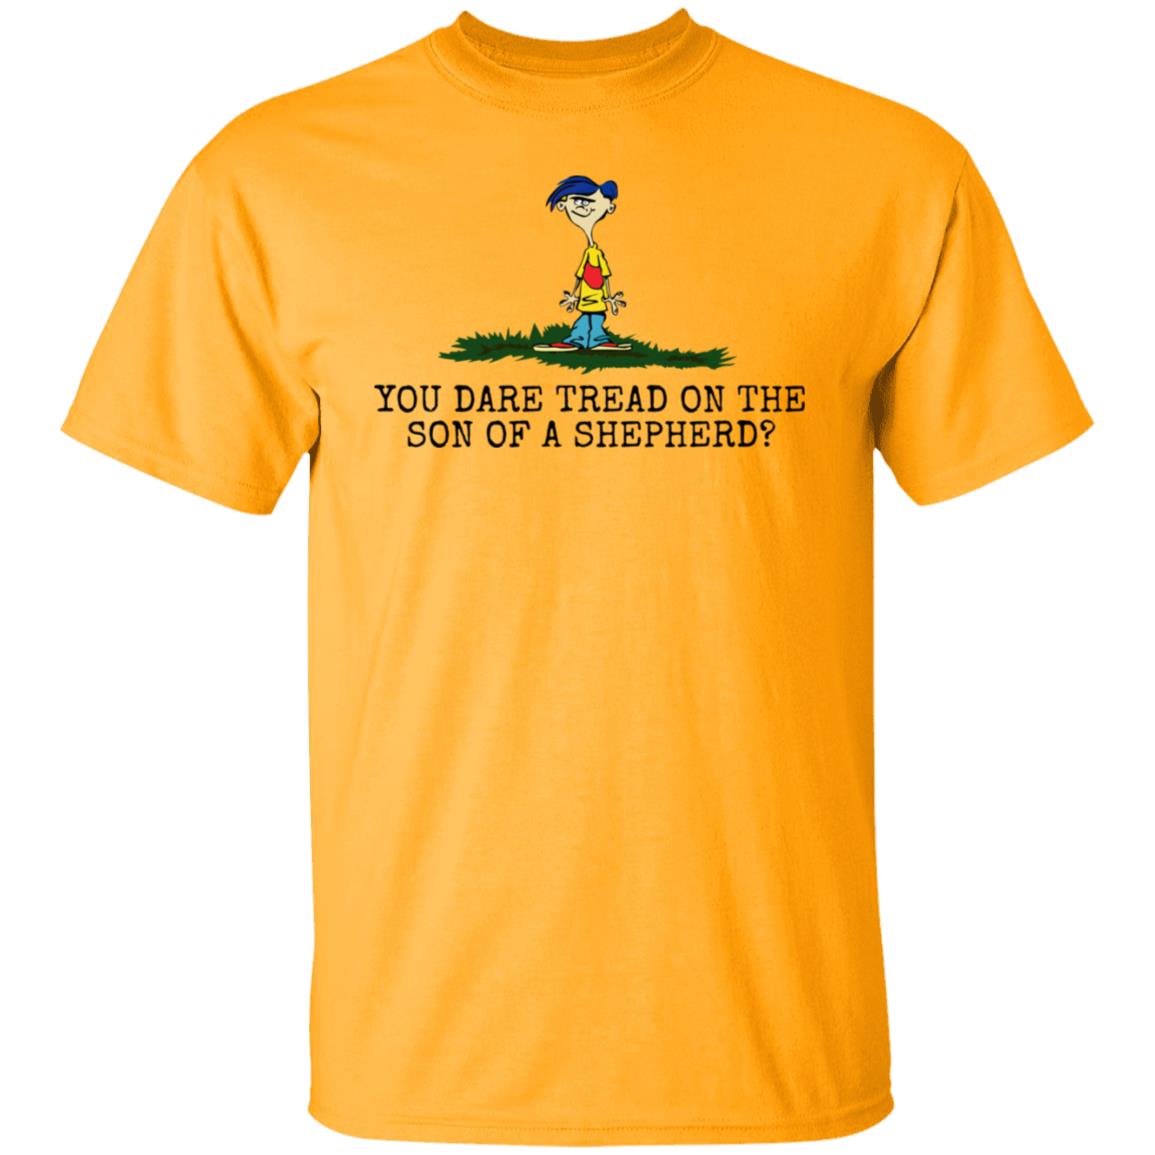 Rolf Ed You dare tread on the son of a shepherd shirt